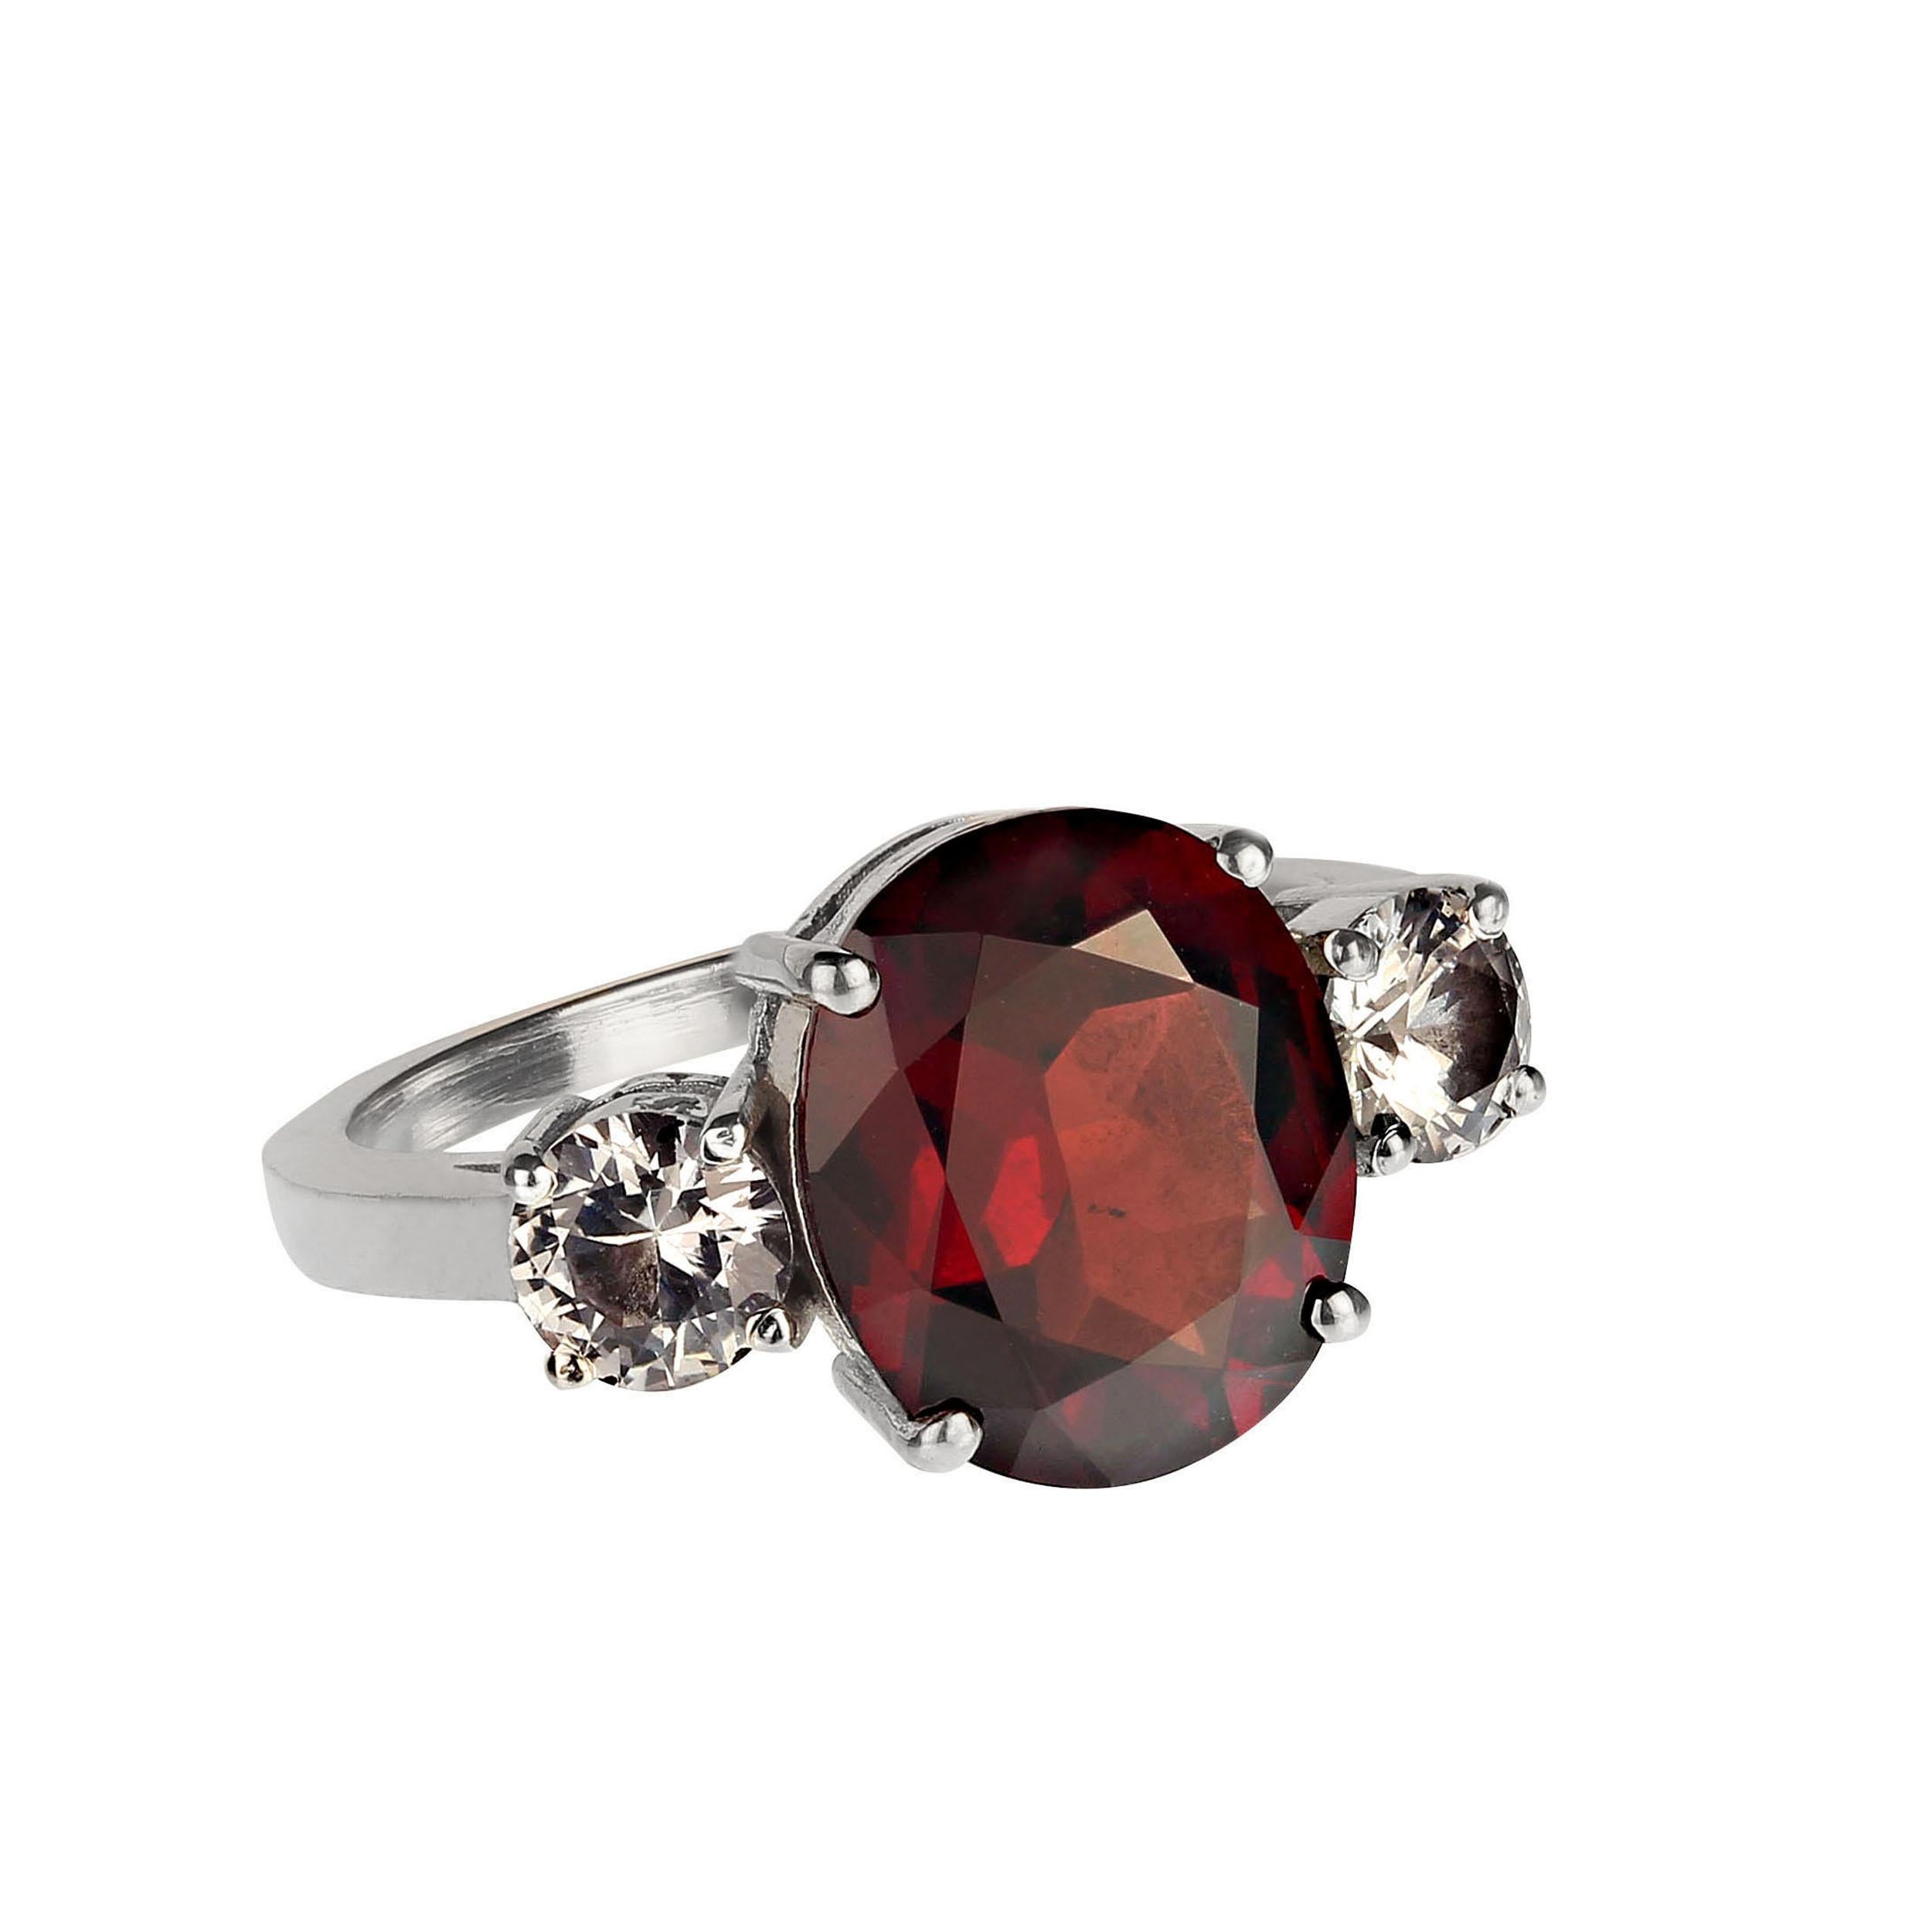 Artisan AJD Classic Three Stone Ring of Gorgeous Garnet and White Sapphires For Sale